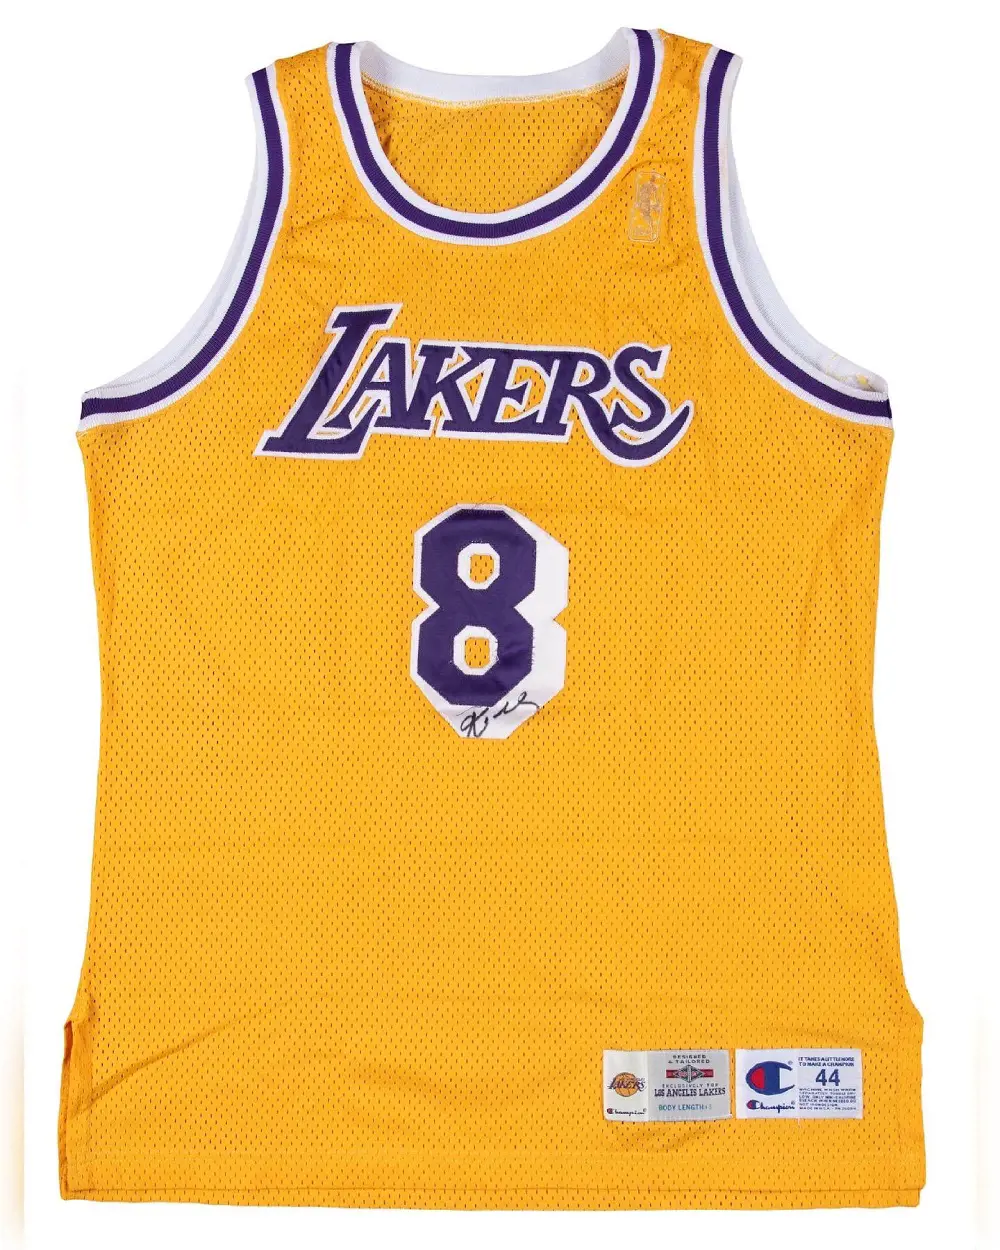 Game-used Kobe Bryant Signed Rookie Jersey was consigned to Goldin Auction to sold.